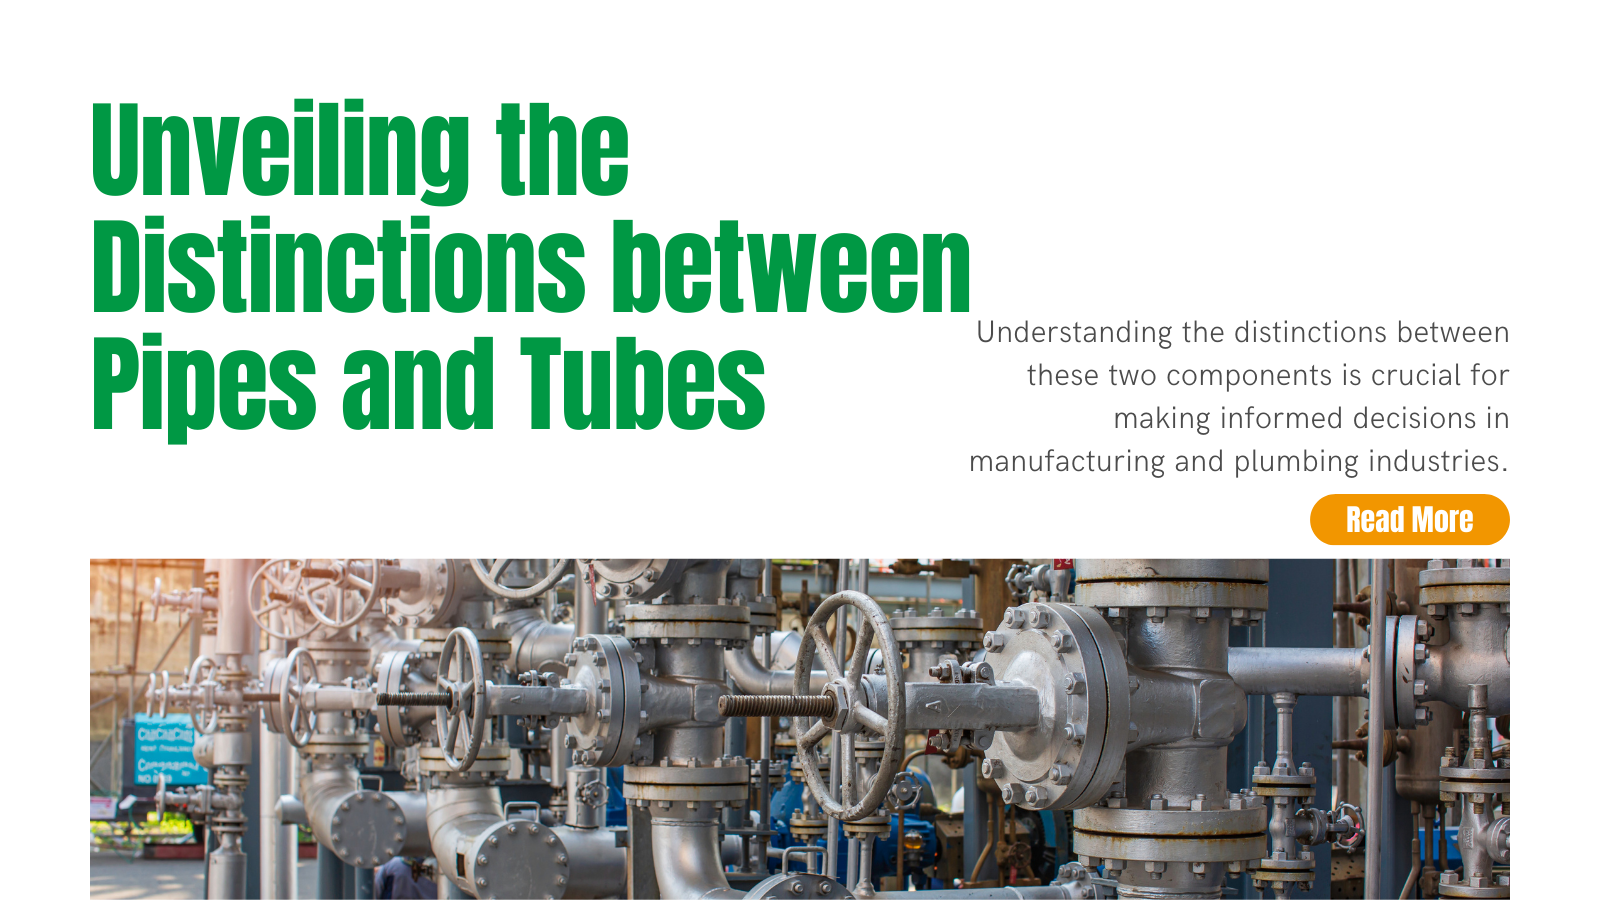 From Manufacturing to Plumbing: Unveiling the Distinctions between Pipes and Tubes | INOX-TEK